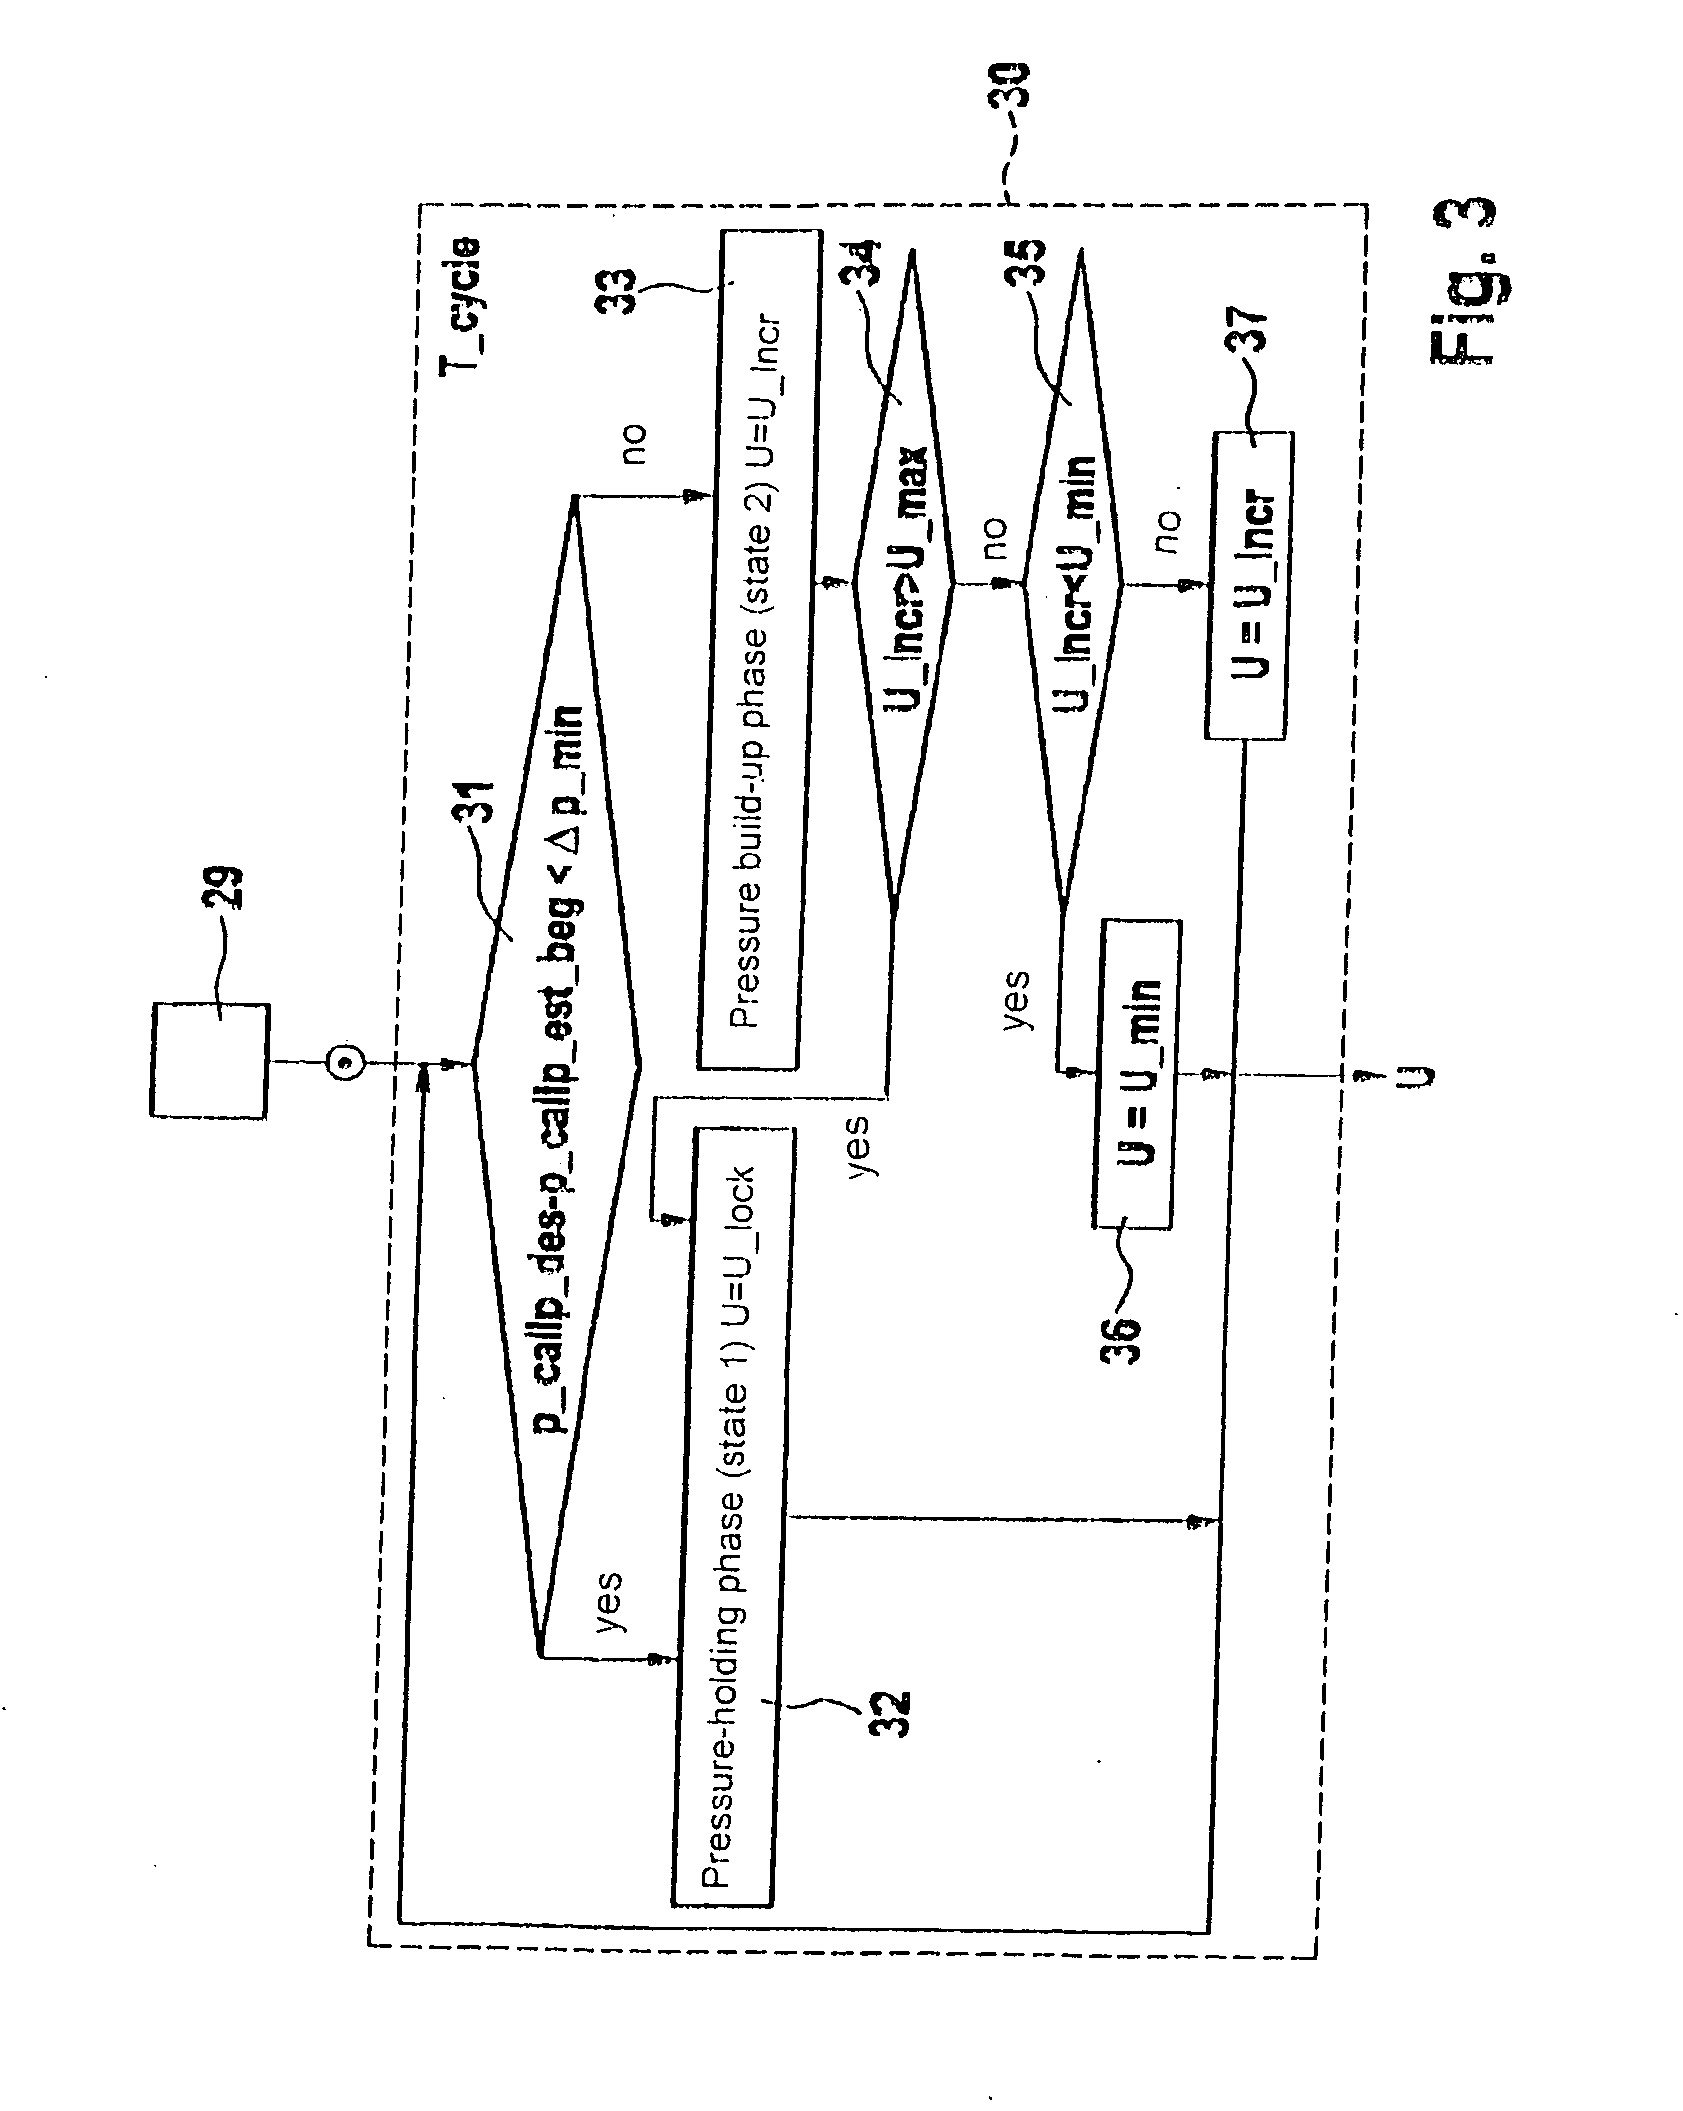 Method for controlling a solenoid valve